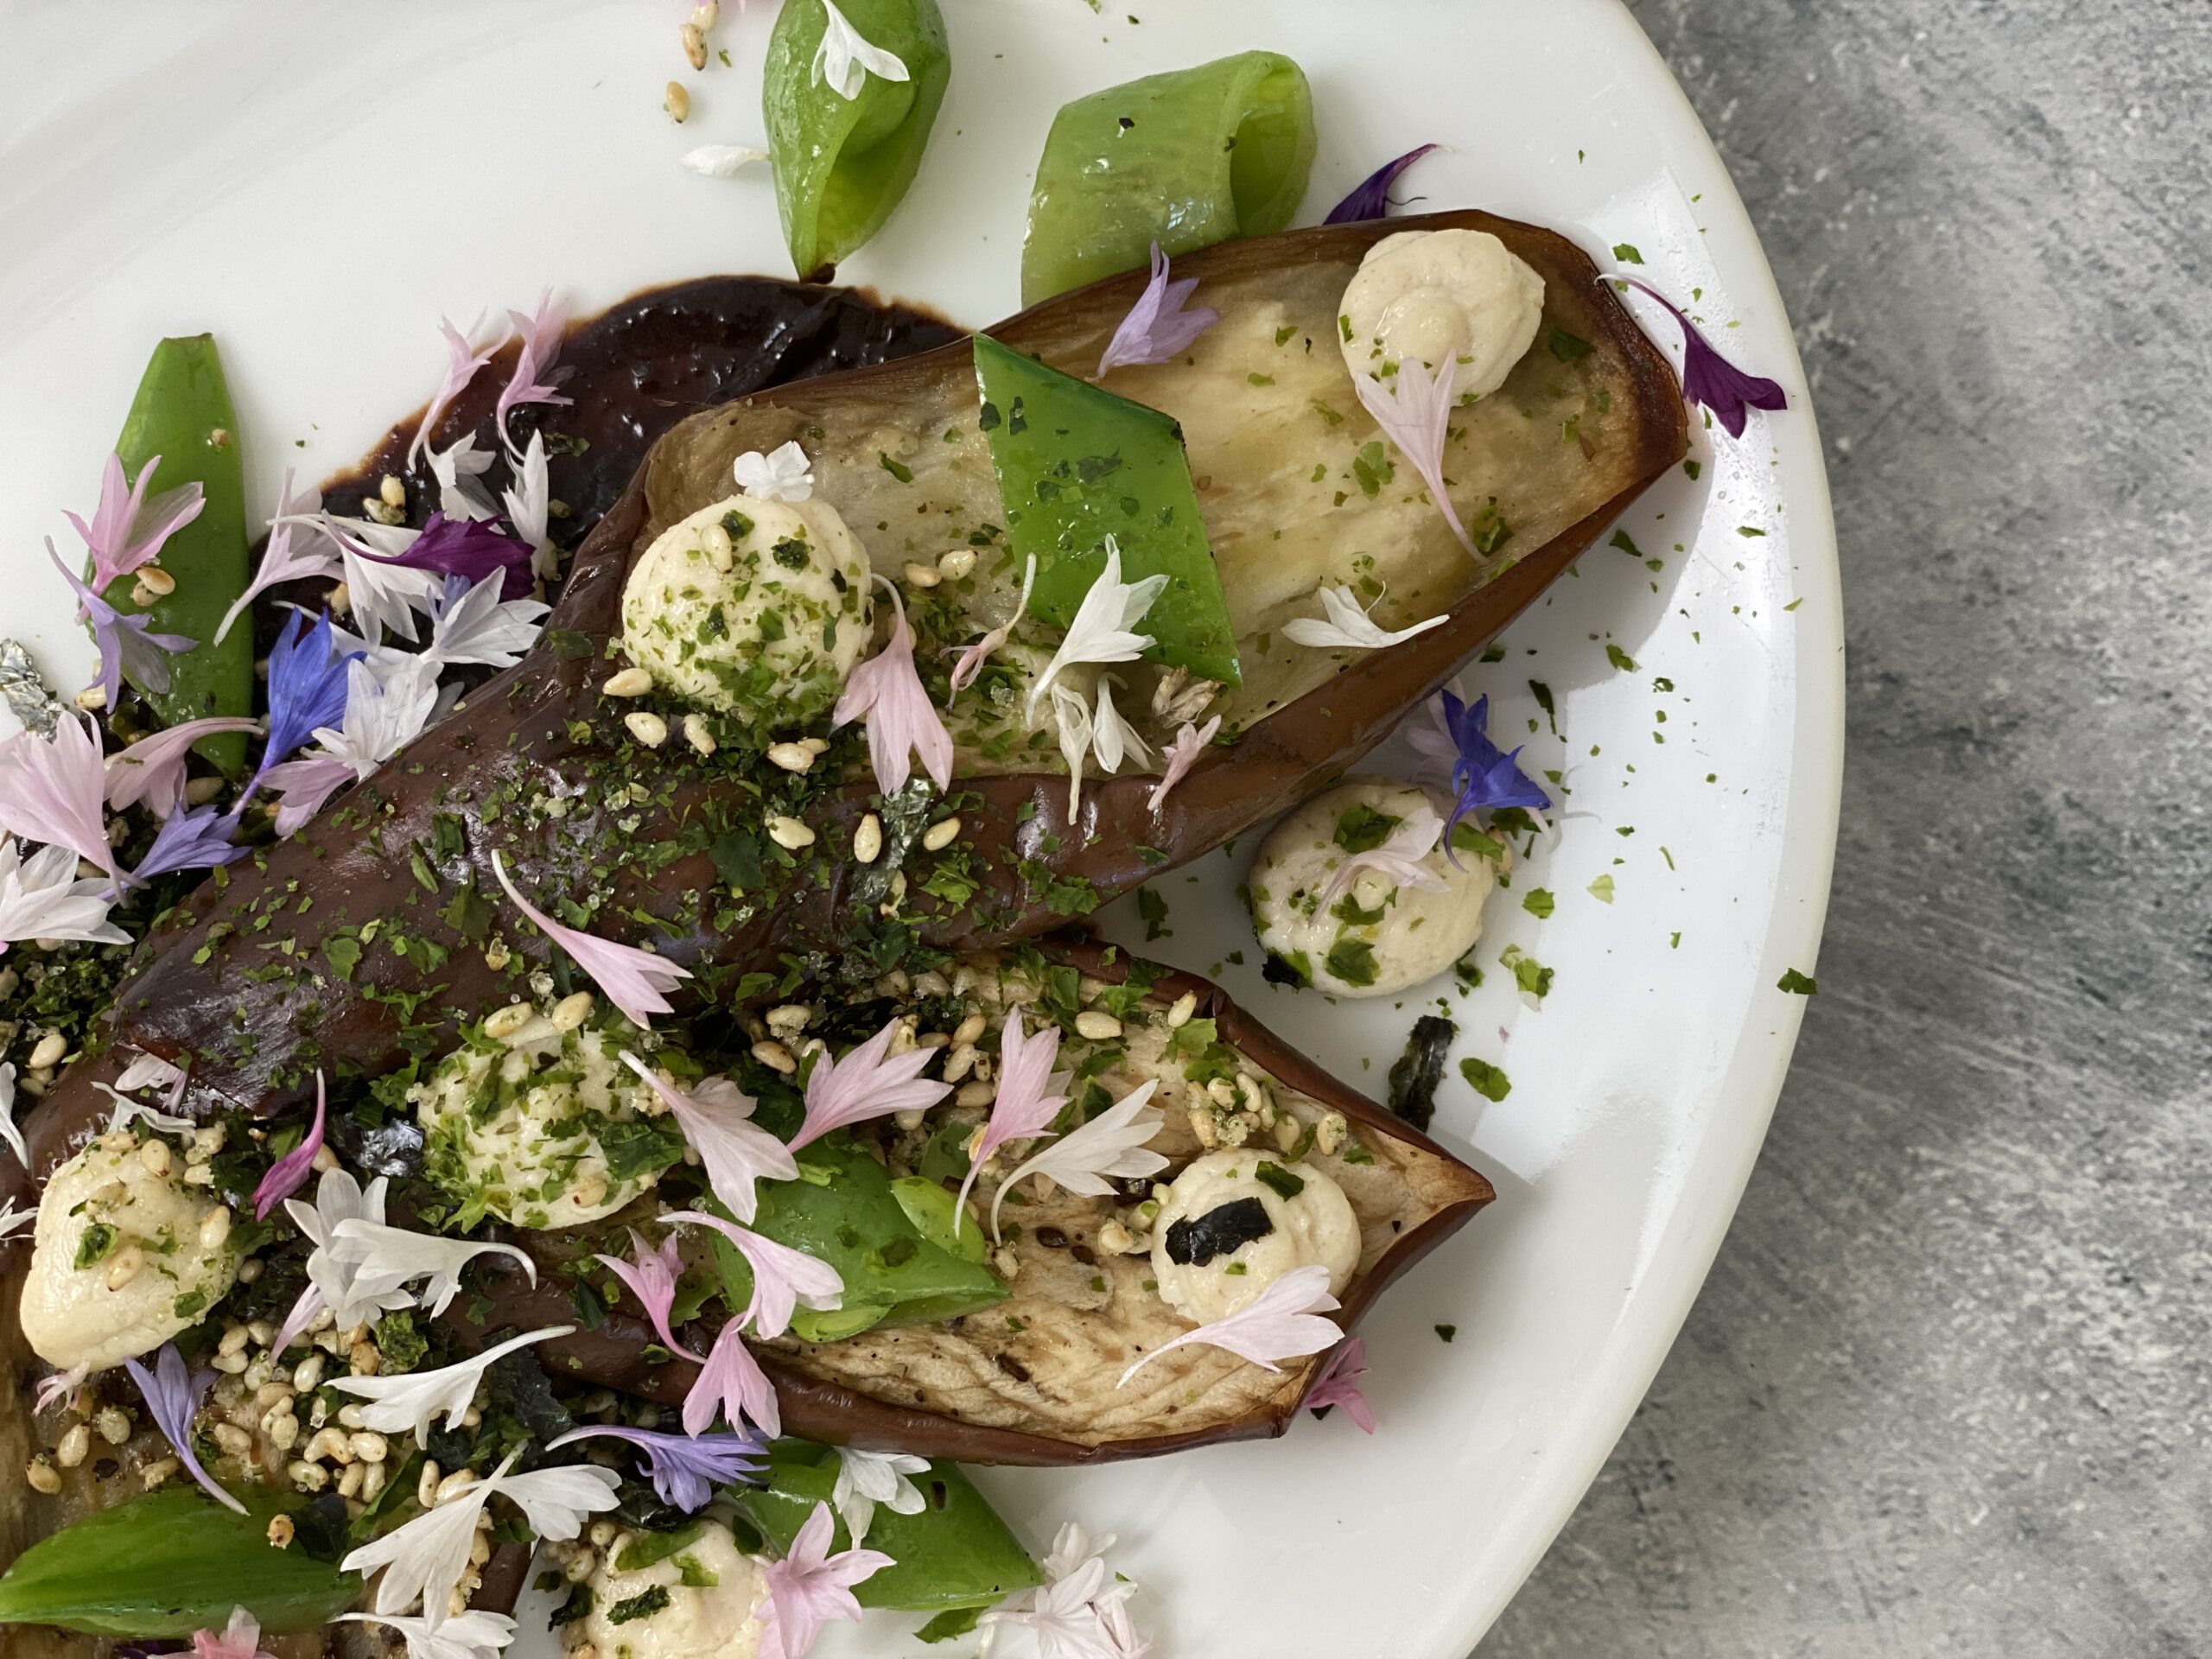 Delightful Japanese Eggplant with Black Garlic Miso and topped with Furikake.